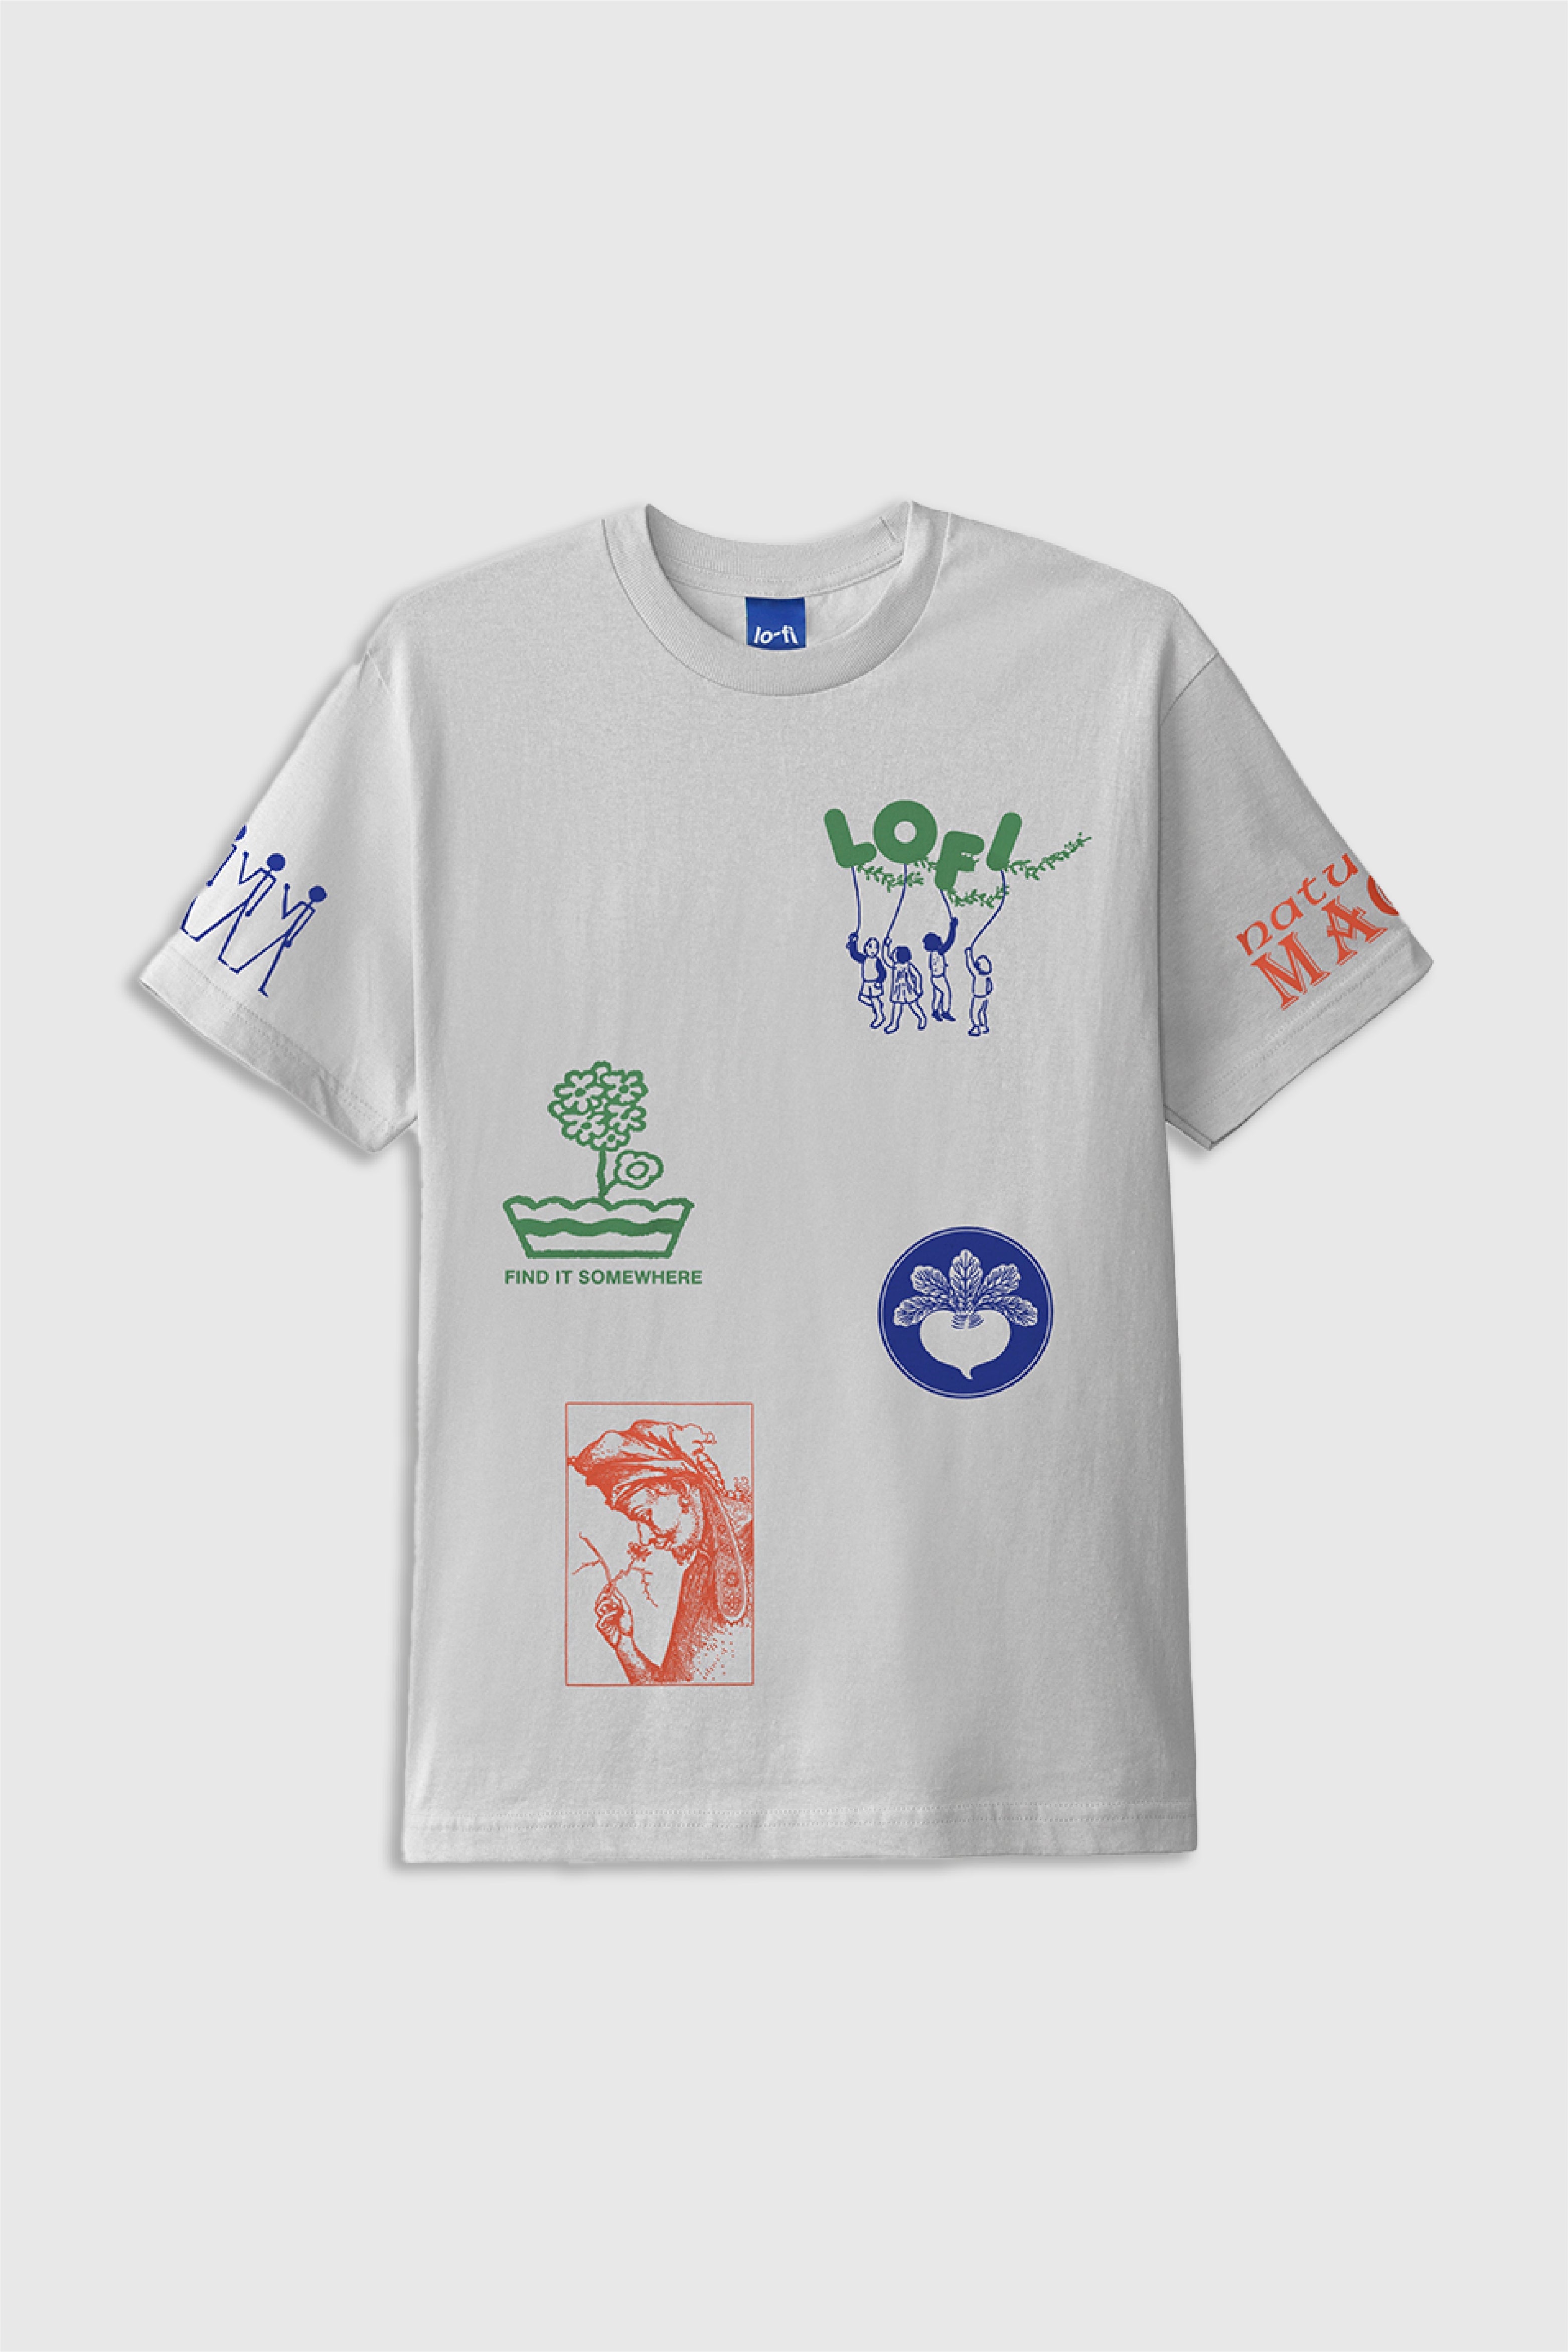 Selectshop FRAME - LO-FI Mother Earth All Over Print Tee T-Shirts Concept Store Dubai